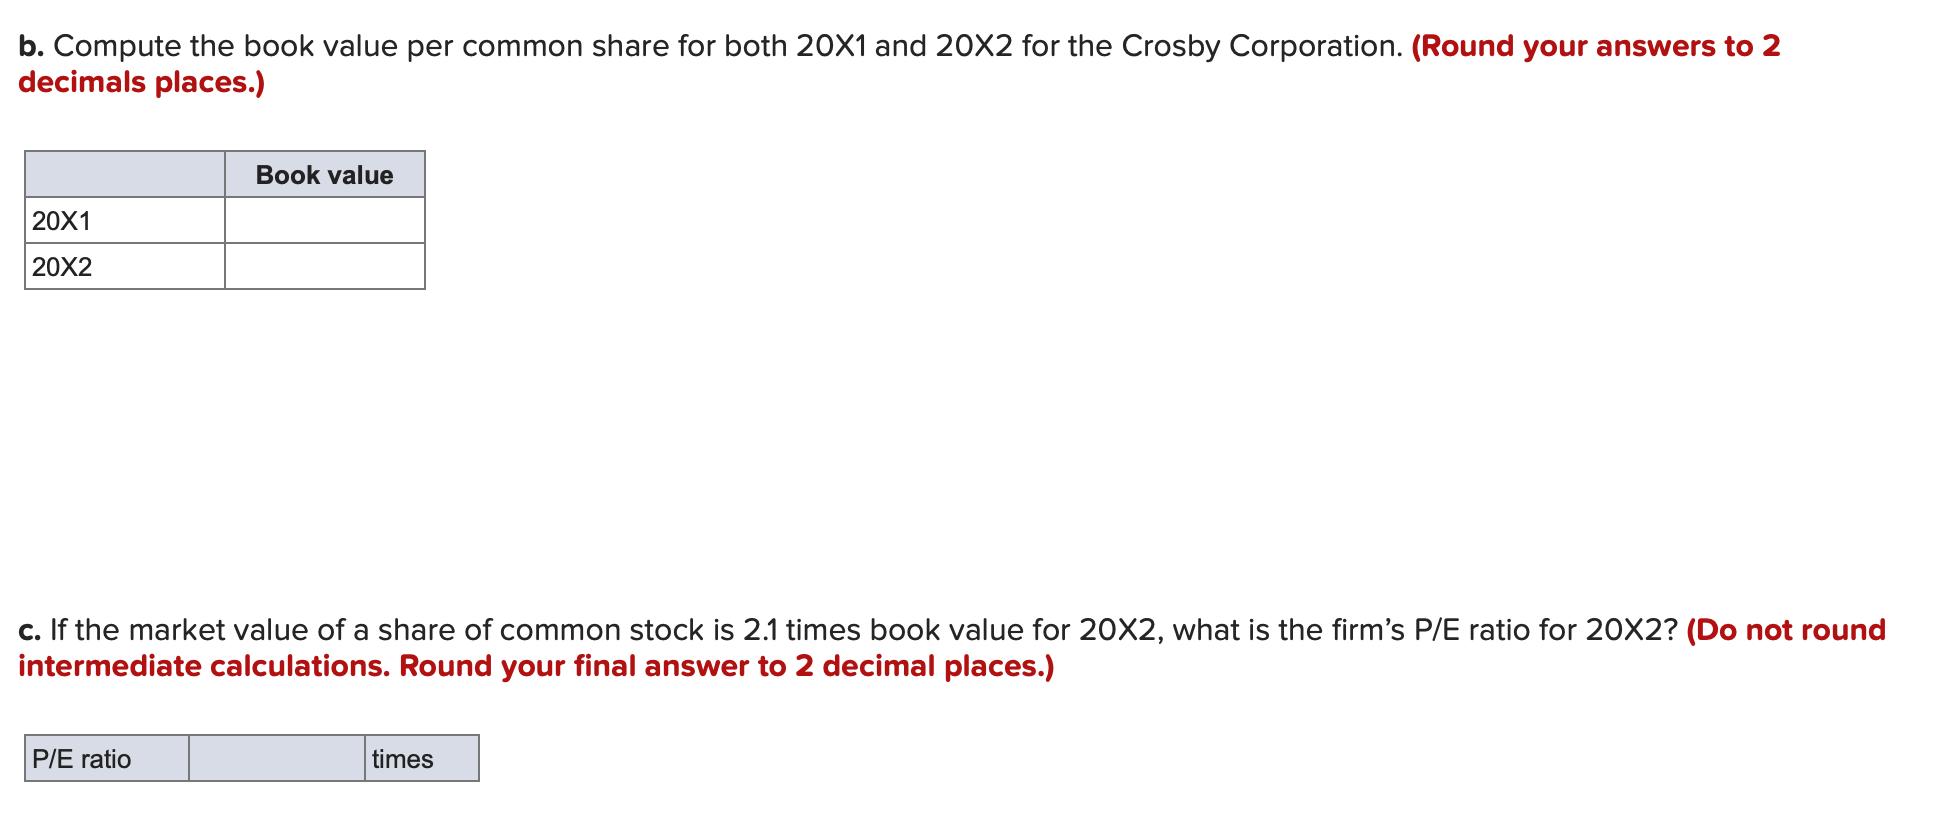 b. Compute the book value per common share for both 20X1 and 20X2 for the Crosby Corporation. (Round your answers to 2 decima